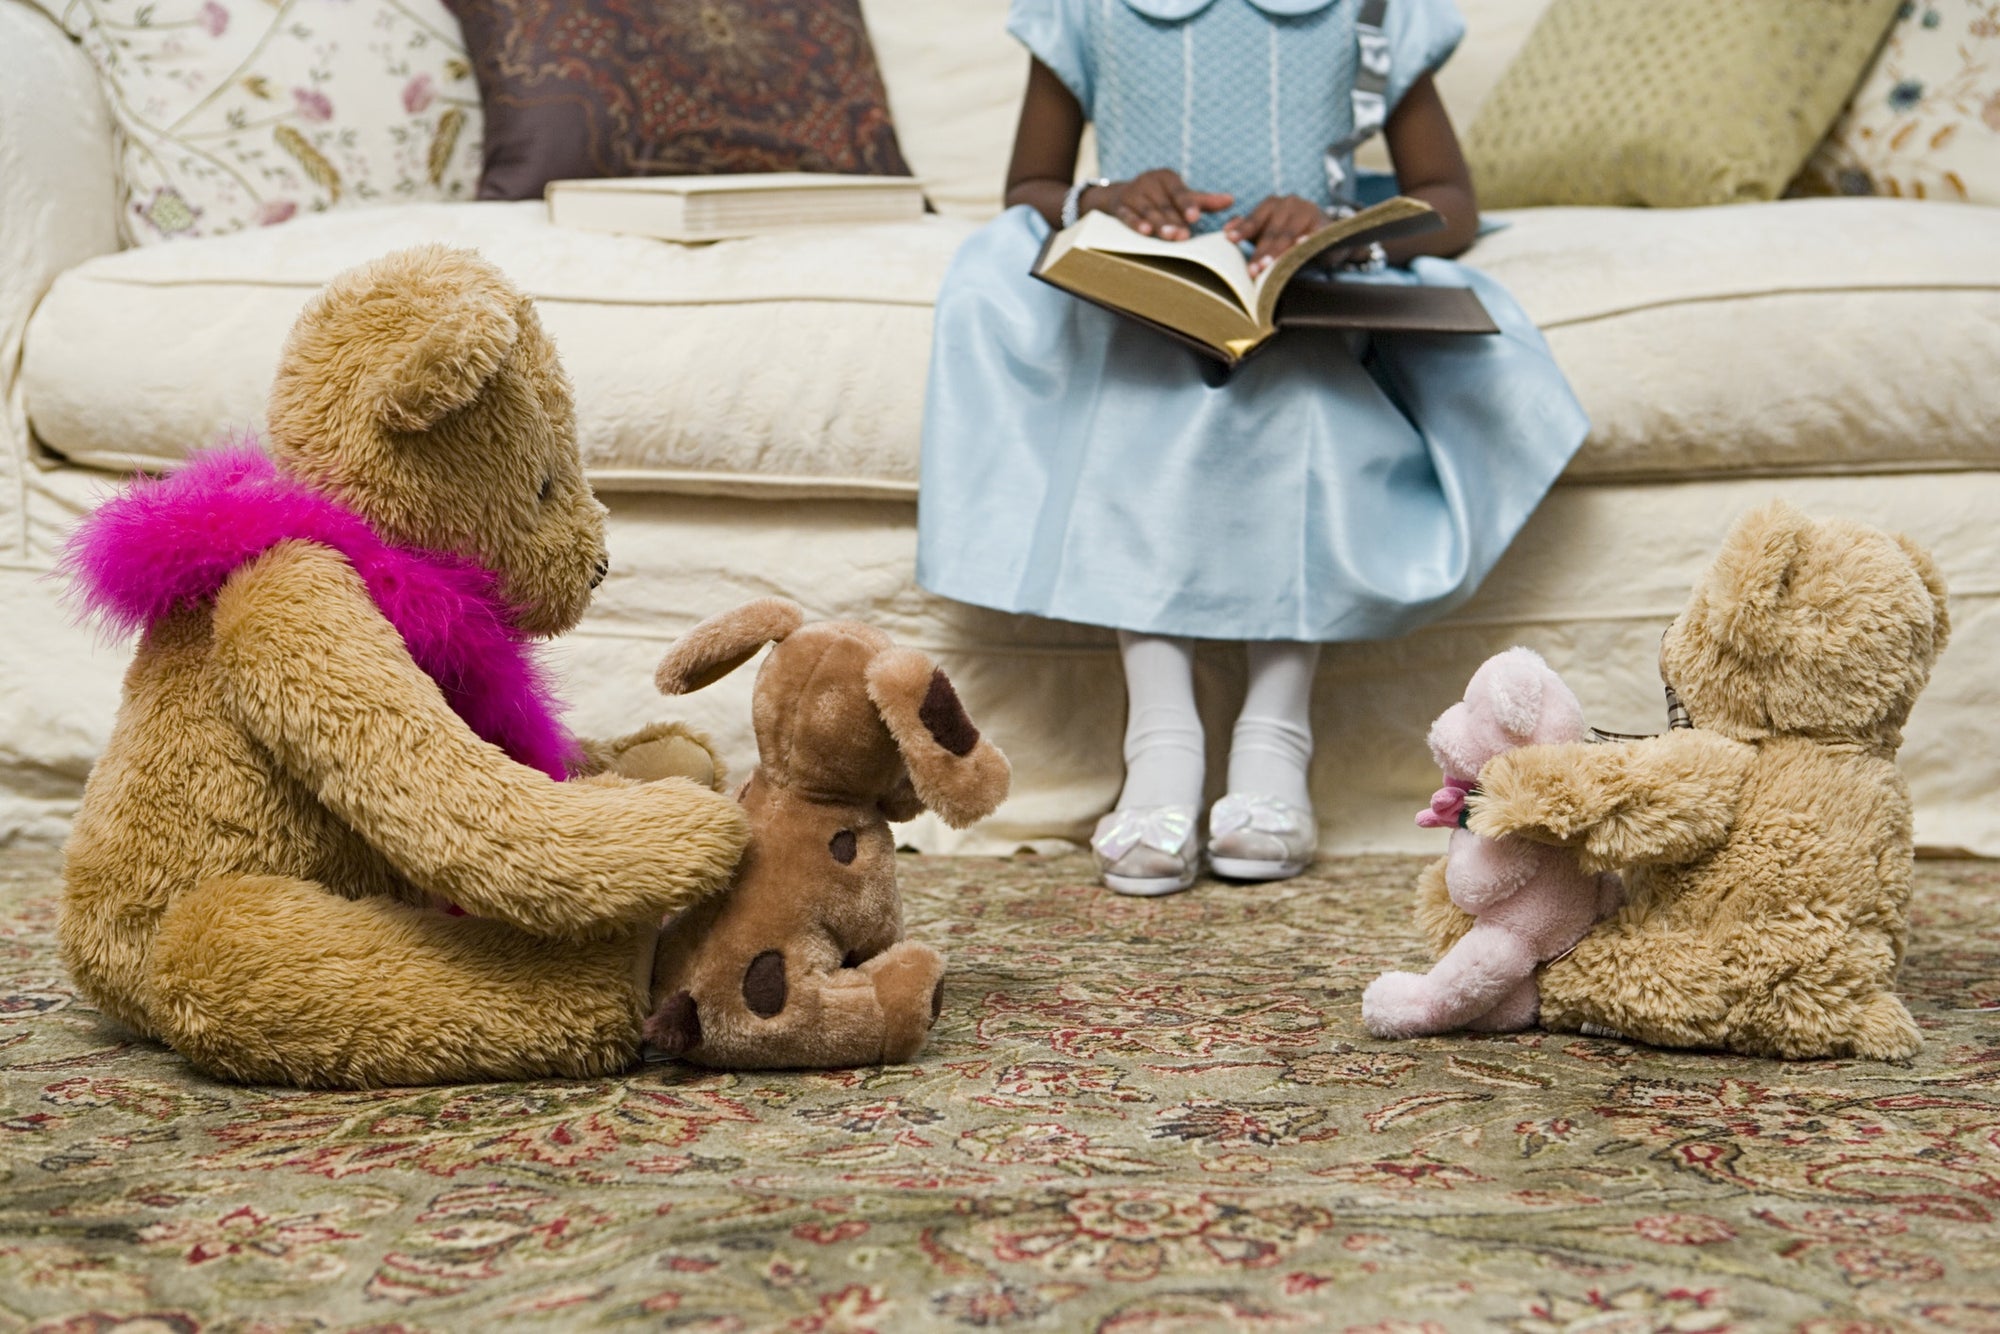 young girl sitting on sofa with book and teddy bear on floor